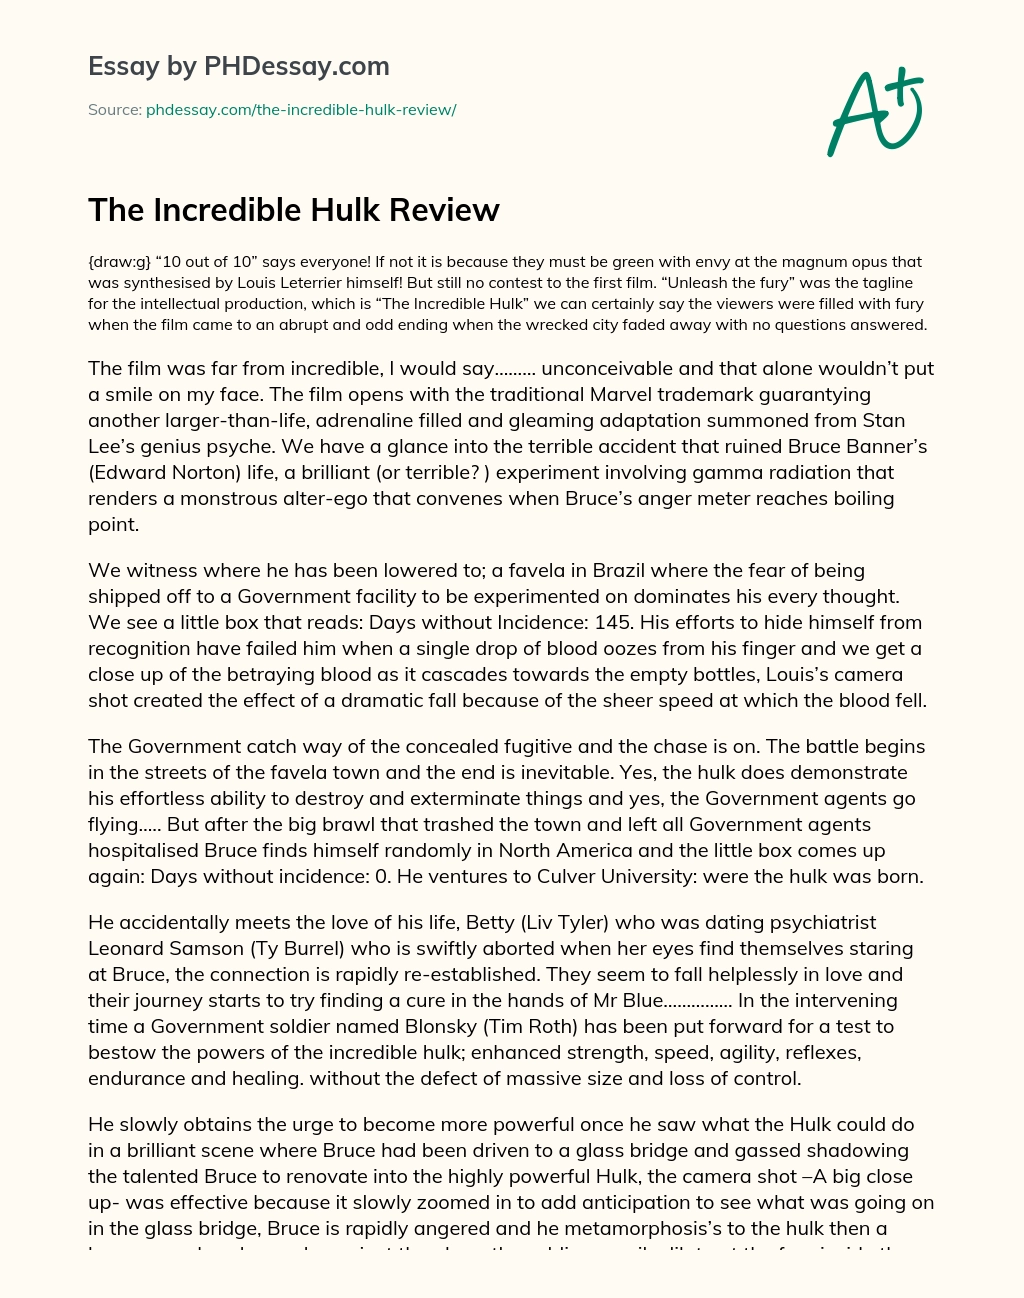 The Incredible Hulk Review essay